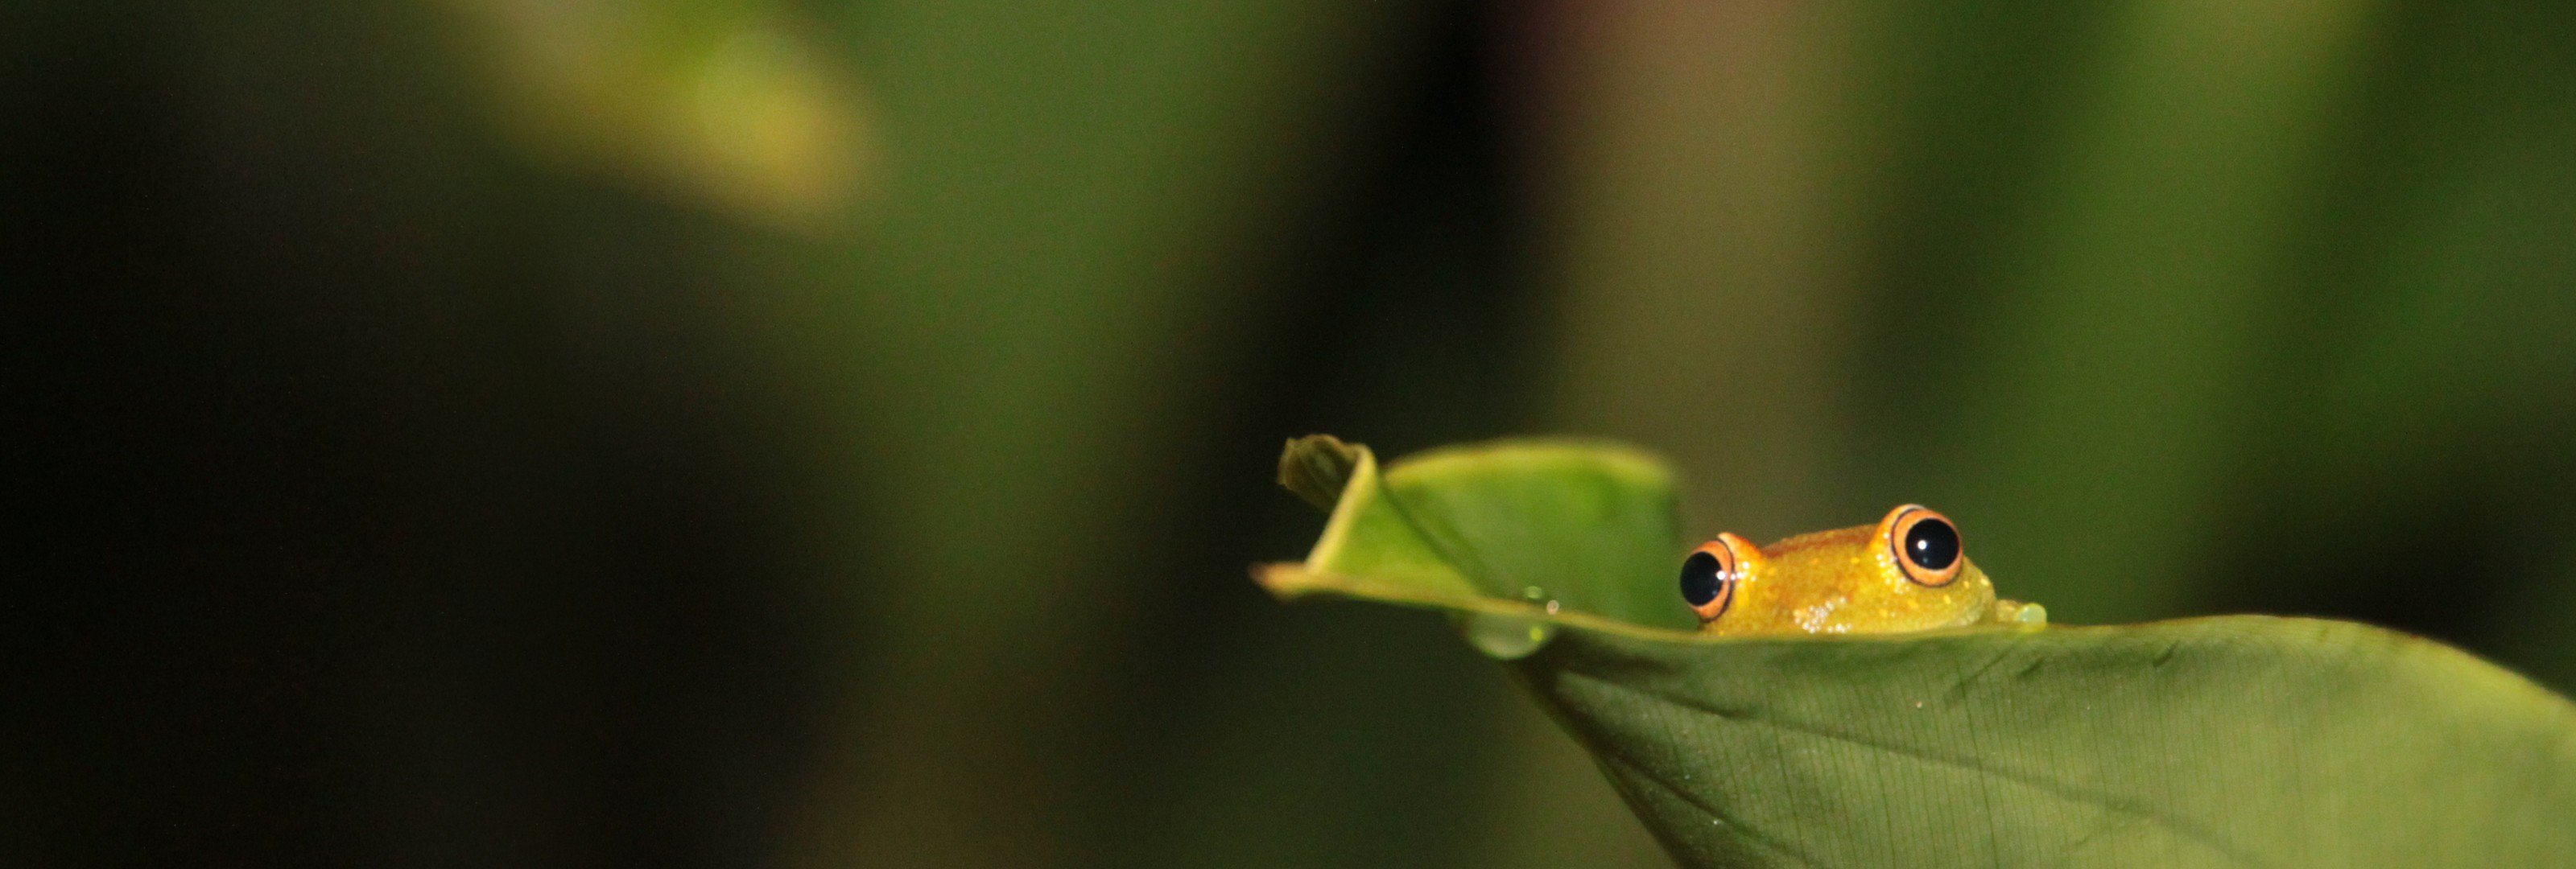 frog, Macro, Blurred, Leaves, Photography Wallpaper